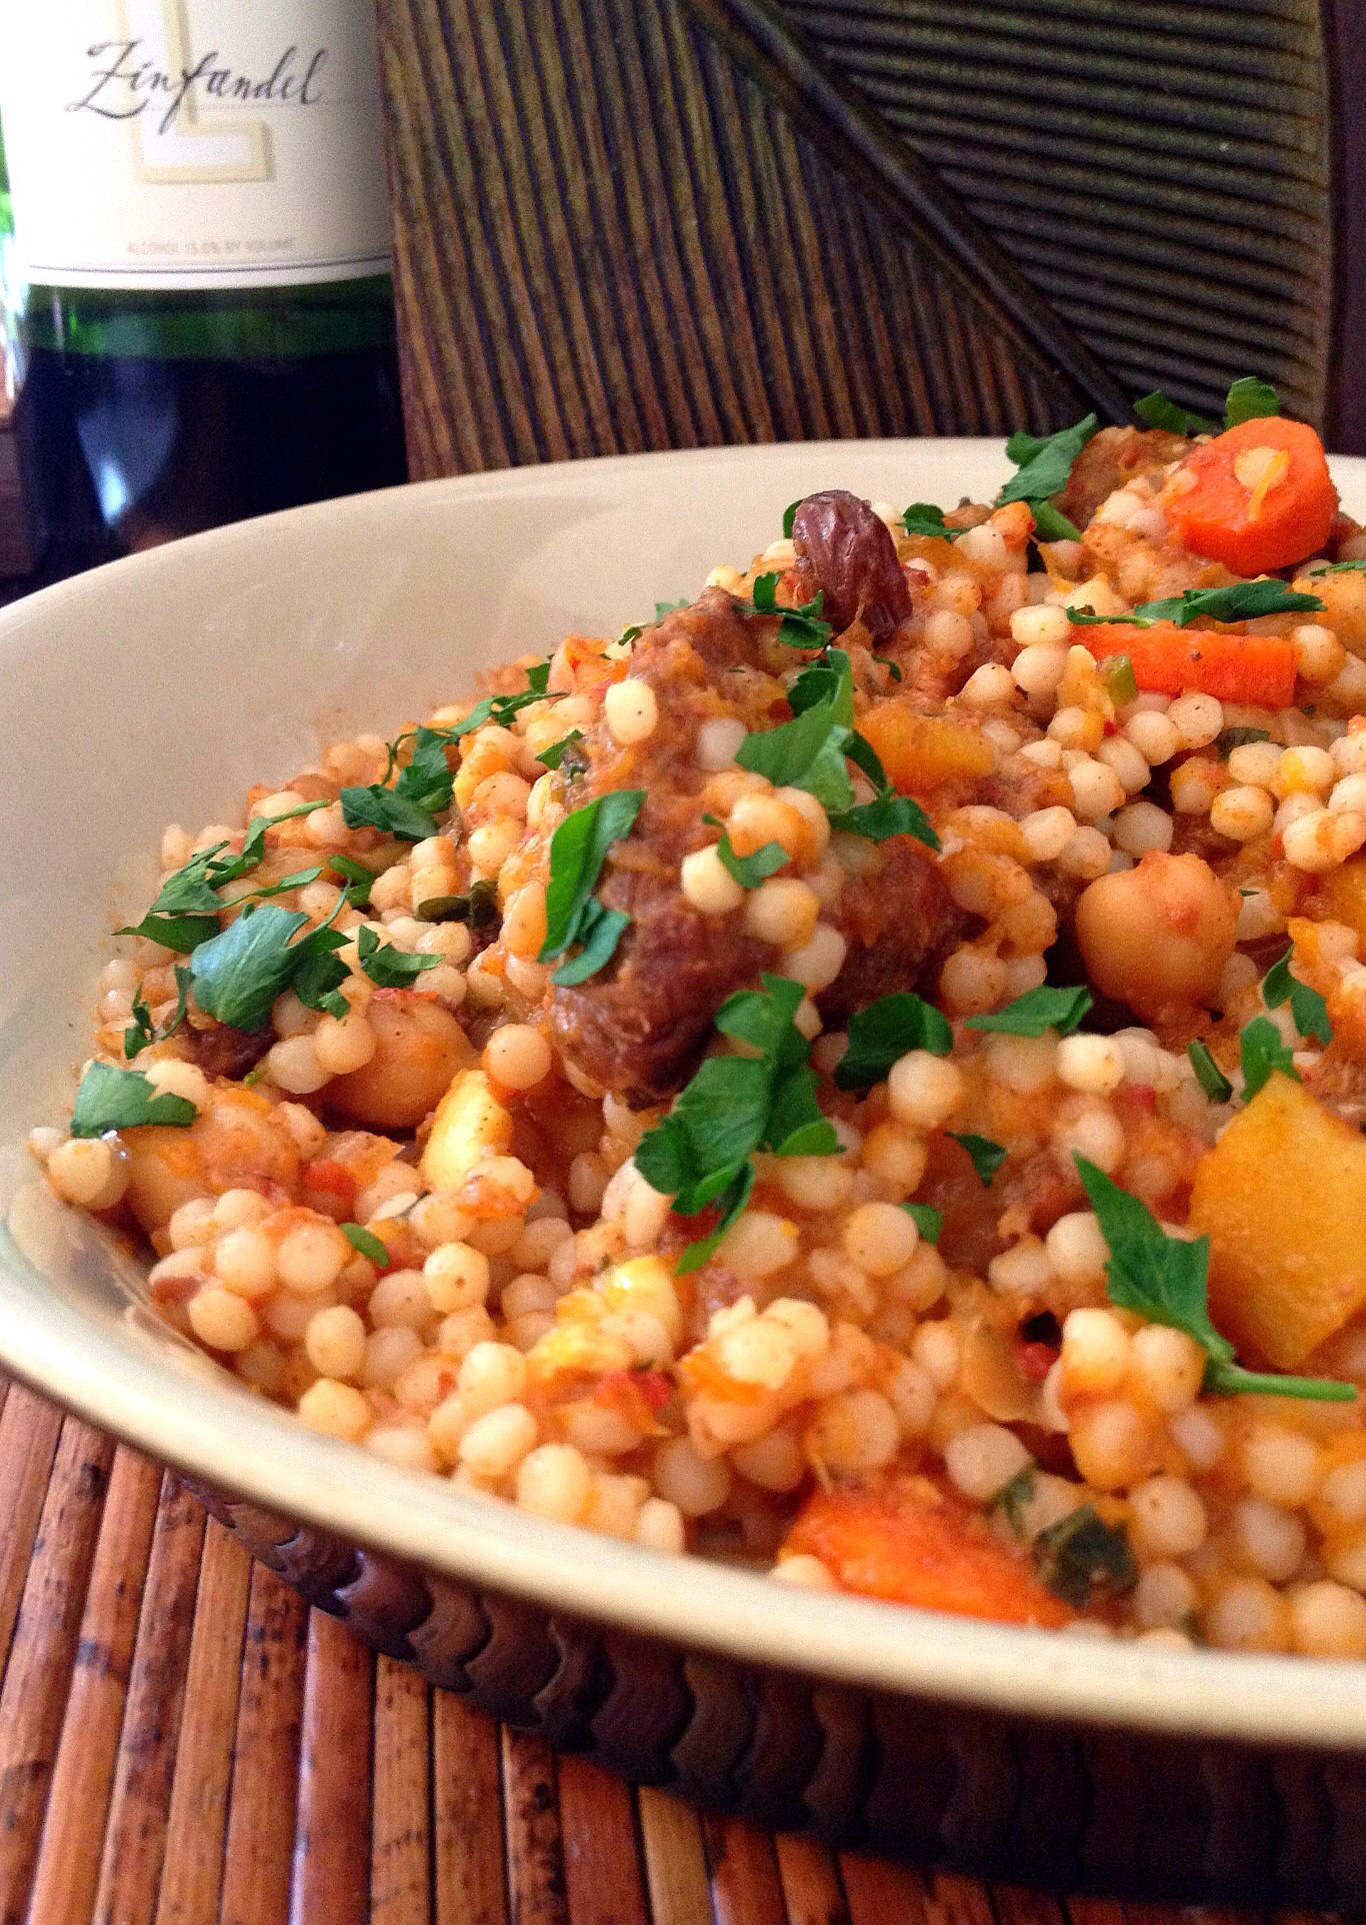 Slow Cooker Moroccan Tagine with Chickpeas & Pearl Couscous